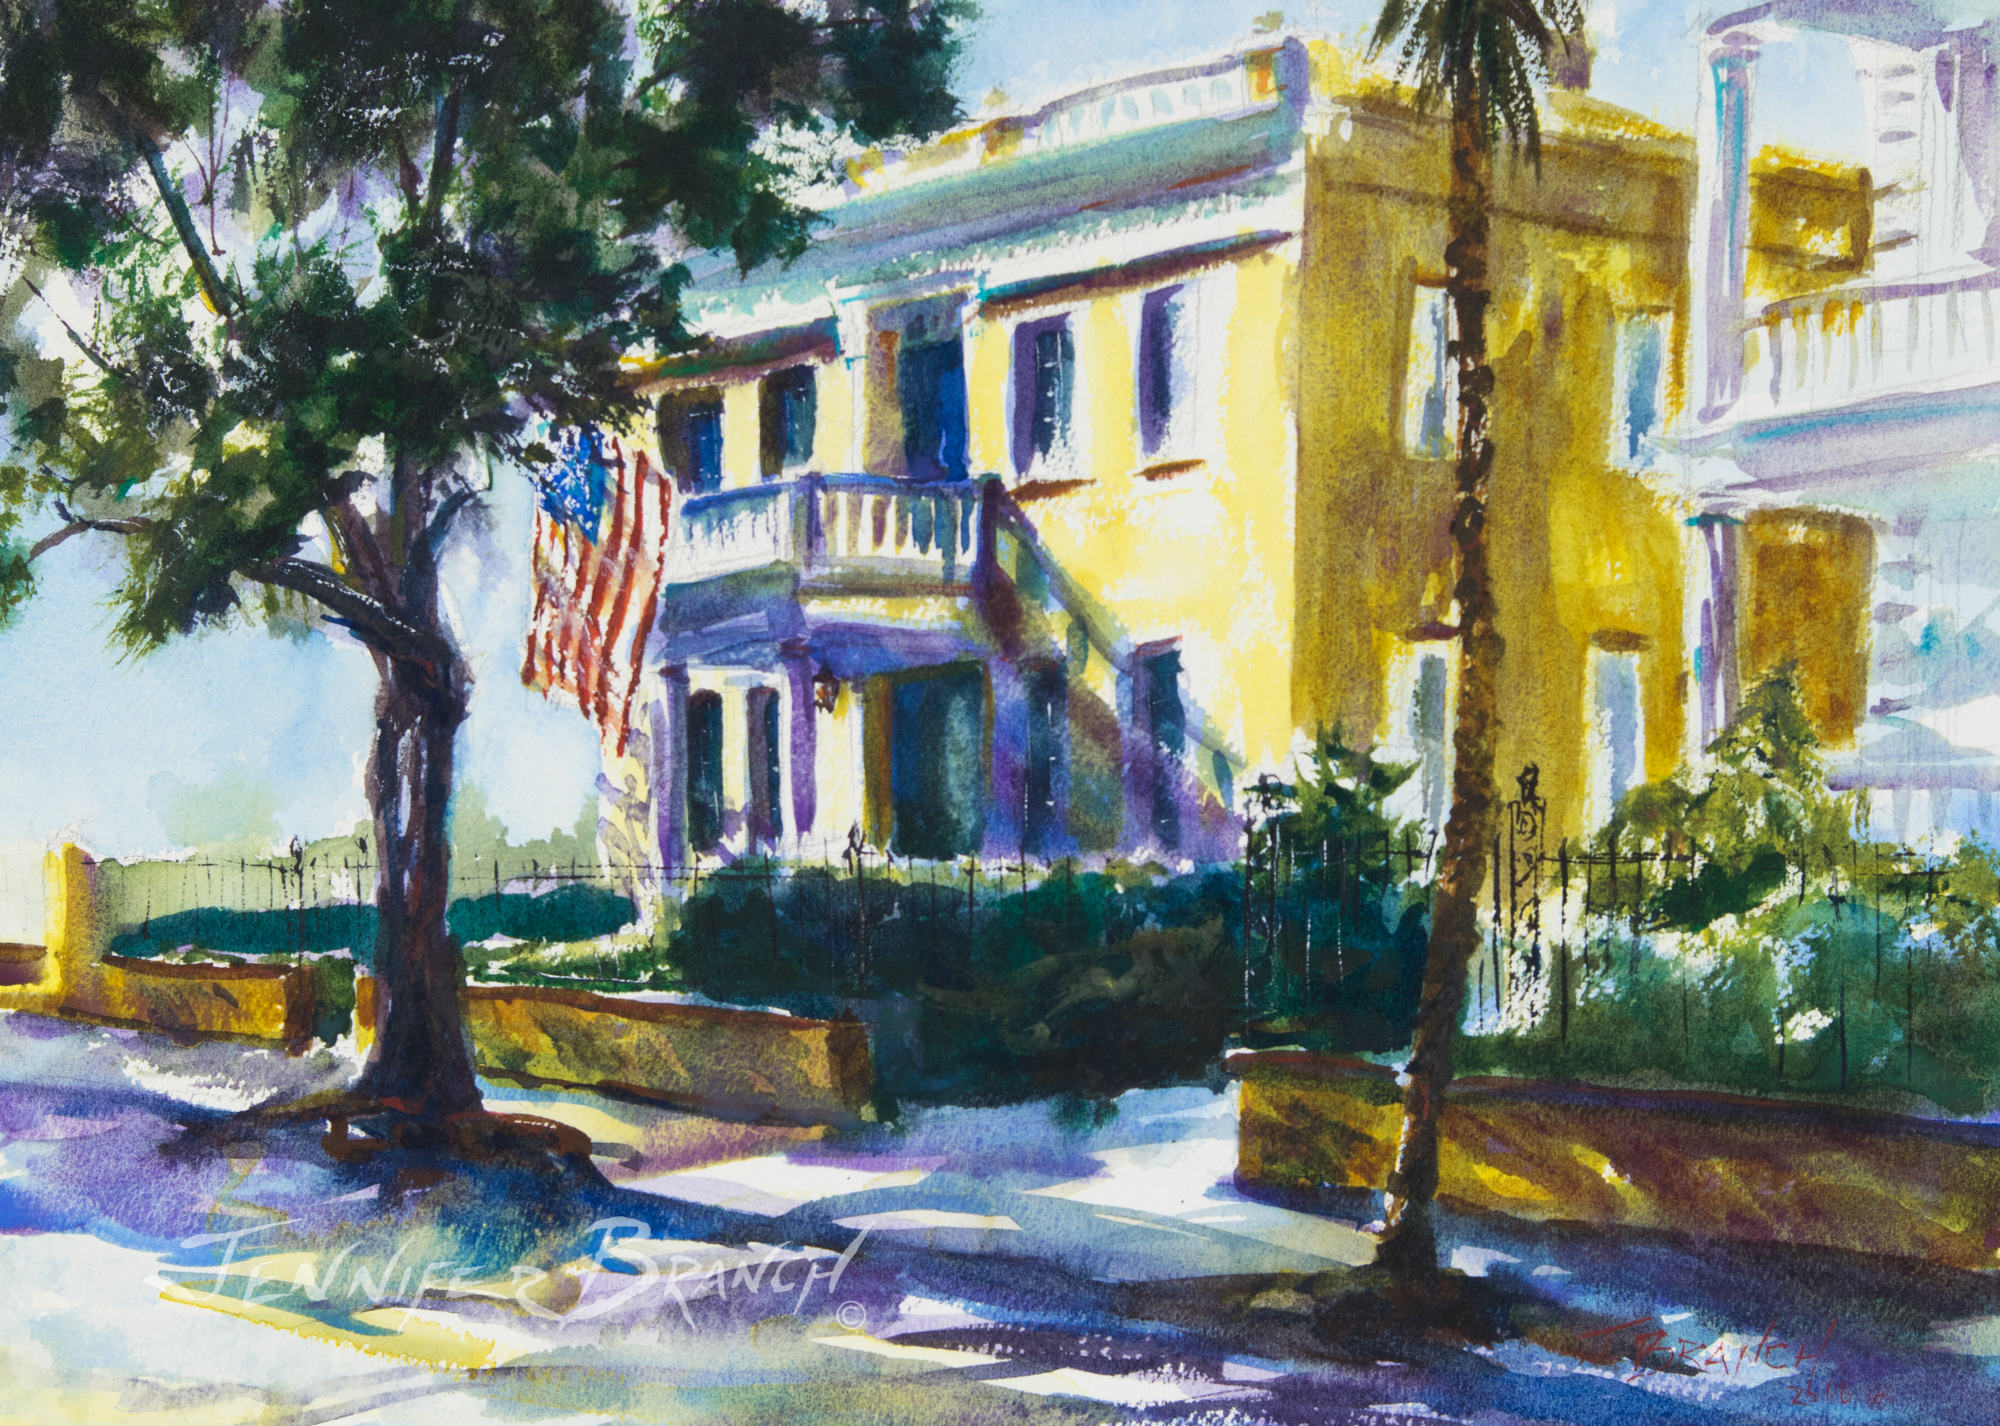 Charleston watercolor painting of a beautiful house flying an American flag.
